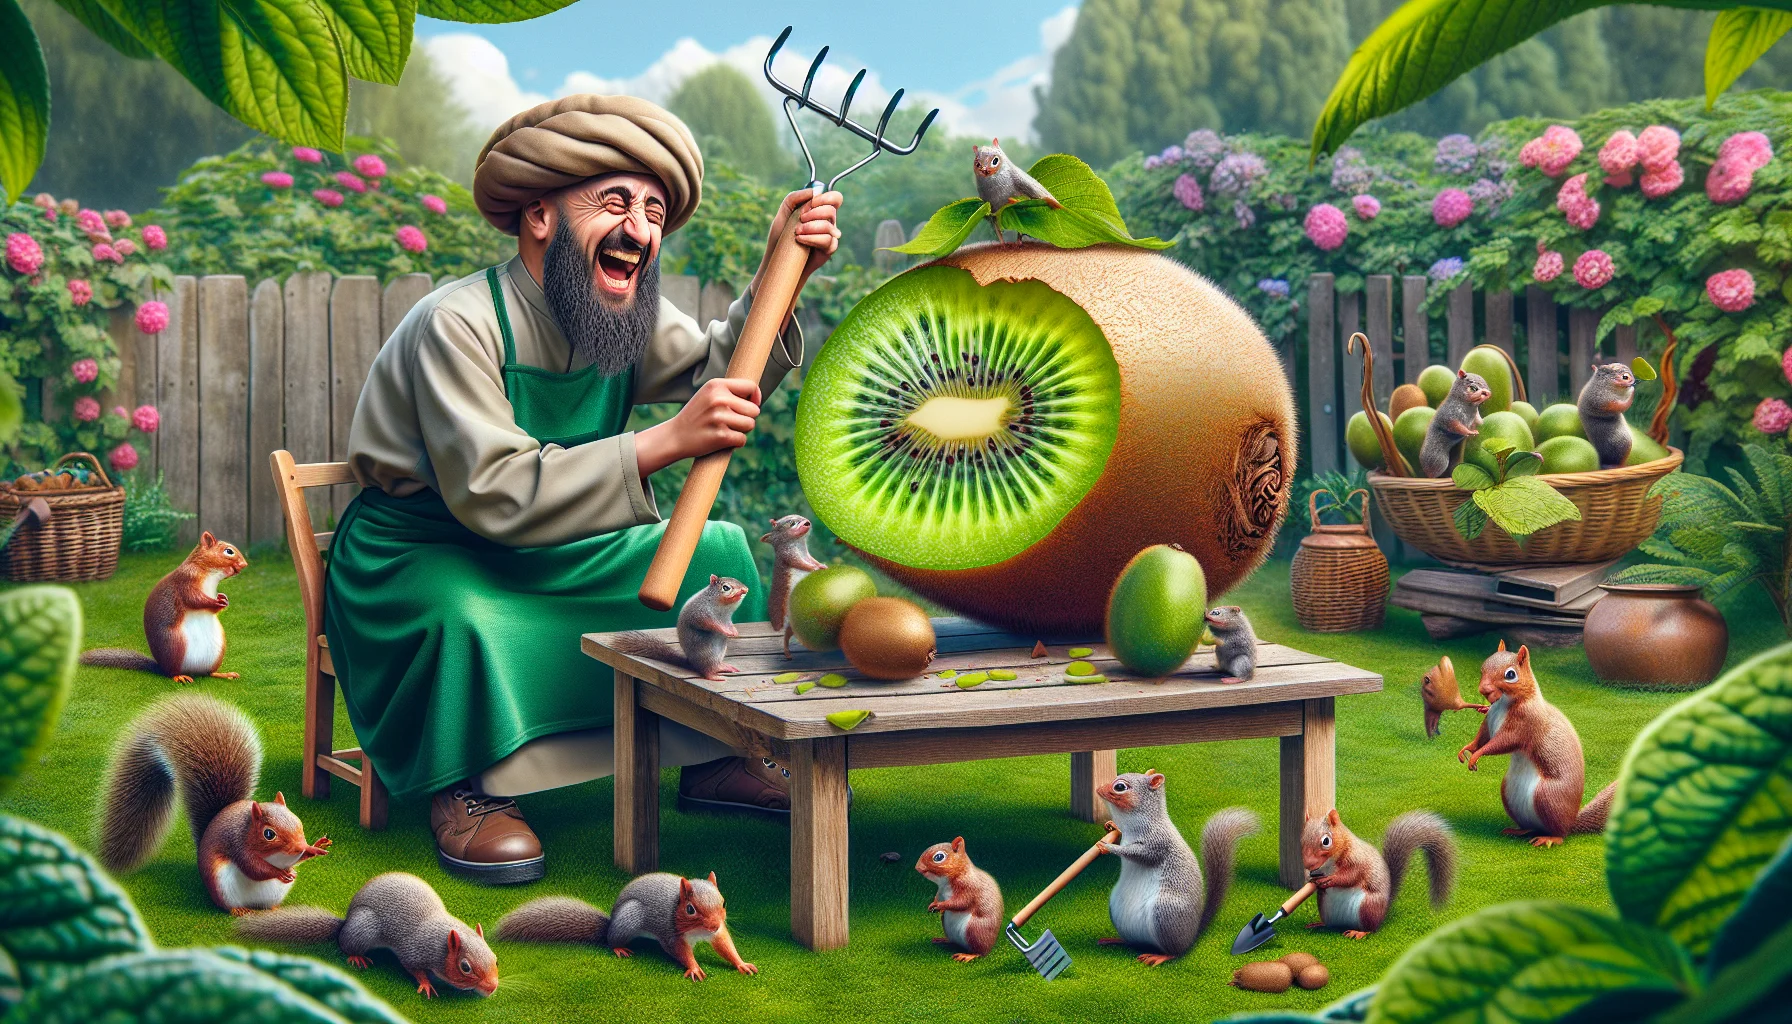 Create a hyper-realistic image illustrating a humorous scene taking place in a lush garden. The focal point of the scene is an oversized, ripe kiwi fruit perched on a quaint wooden table. There are cartoon-like gardening tools scattered around playfully. Zoom in to a person with Middle-Eastern descent, wearing a gardener's hat and attire, demonstrating how to peel the kiwi using a wee-sized garden rake. The kiwi is disproportionately large compared to the rake, and the person is laughing heartily, making the scene lively. Additionally, show curious squirrels, birds, and flowers observing the scene, enhancing the feeling of a lively garden setting.